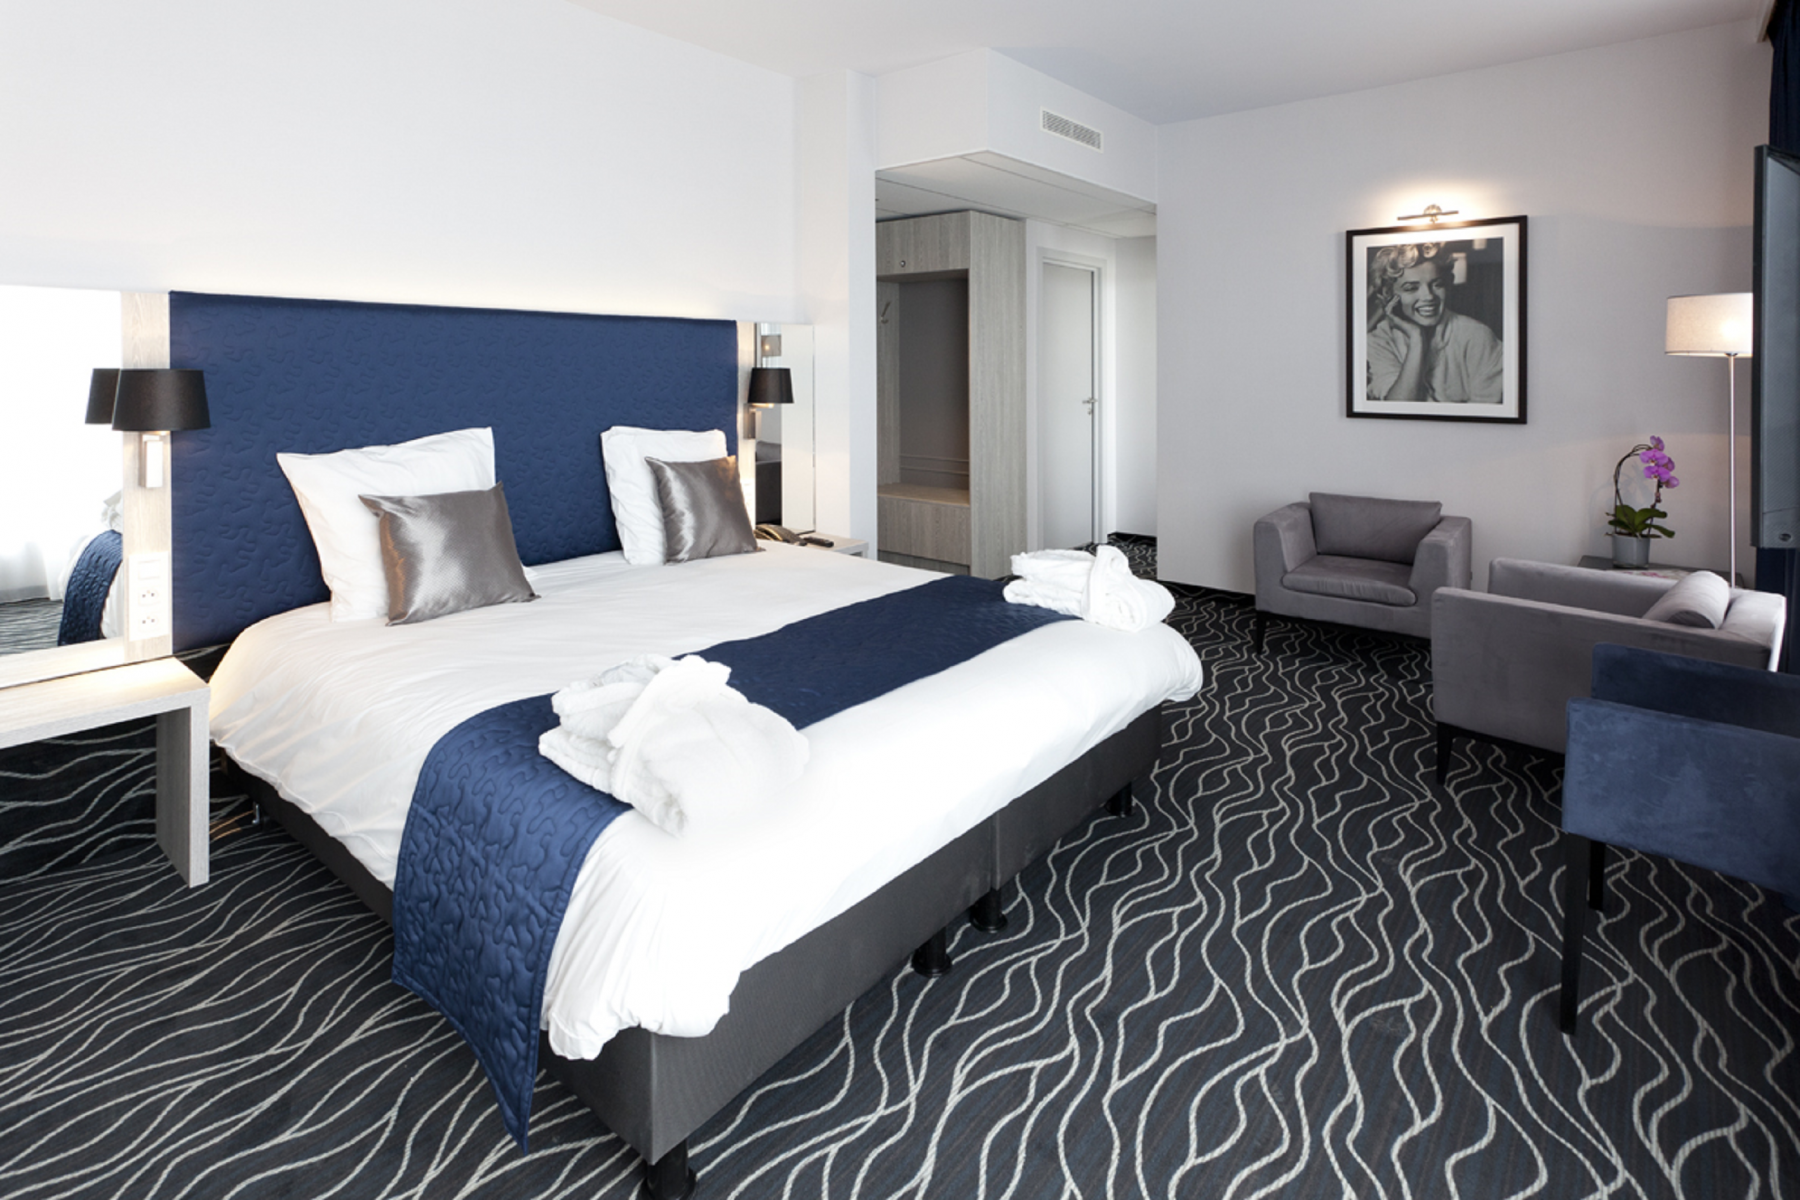 Van der Valk Hotel Mons Congres <br/>69.00 ew <br/> <a href='http://vakantieoplossing.nl/outpage/?id=ccd2972f03237e169a50f10caf9275d5' target='_blank'>View Details</a>